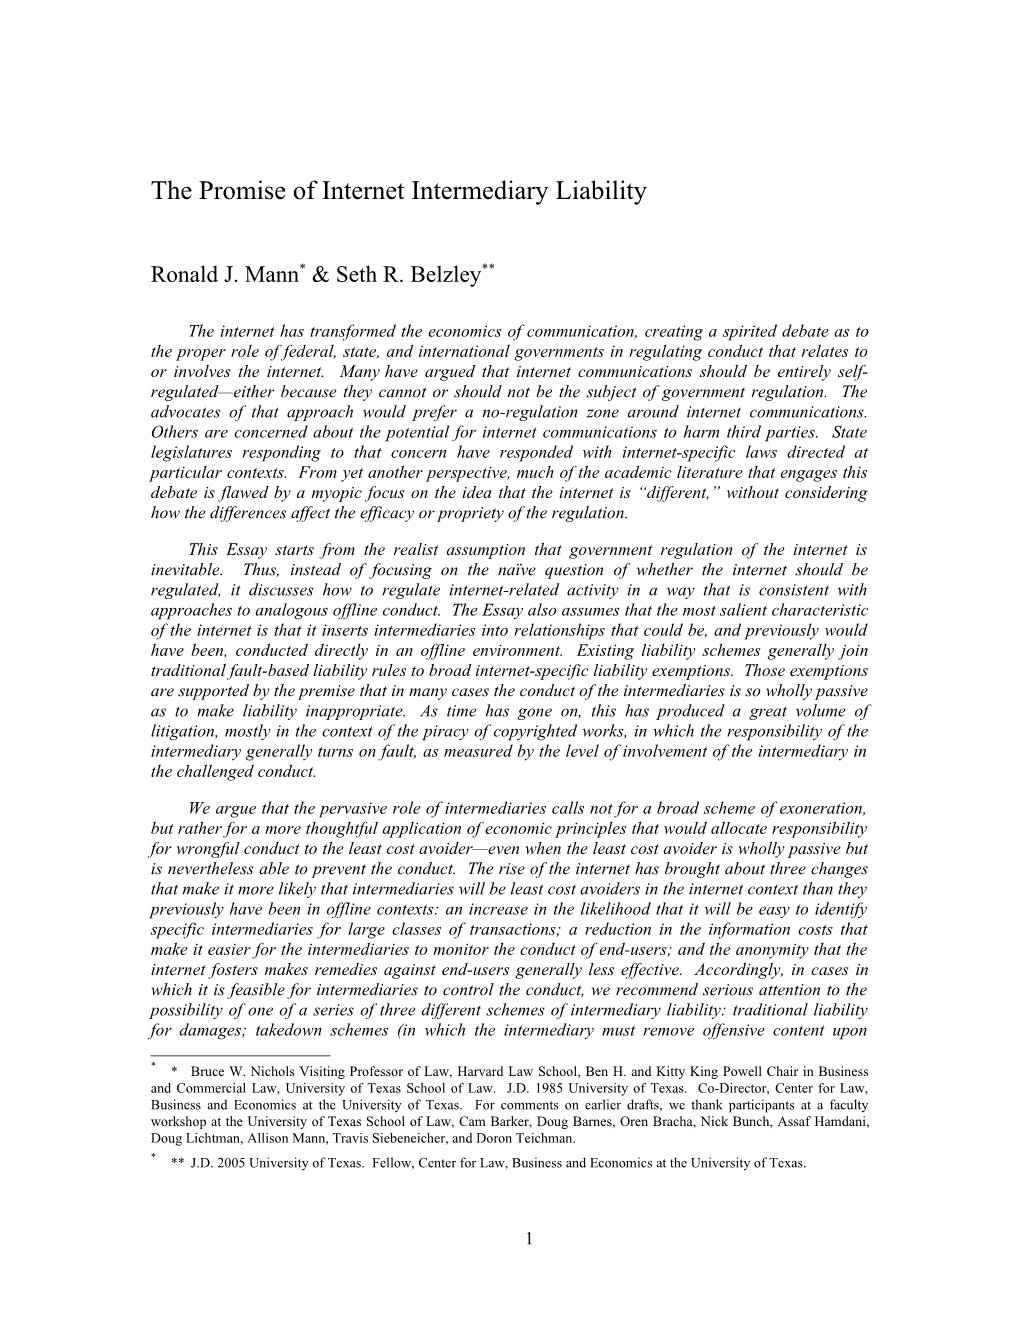 Preventing Internet Ills: the Promise of Internet Intermediary Liability